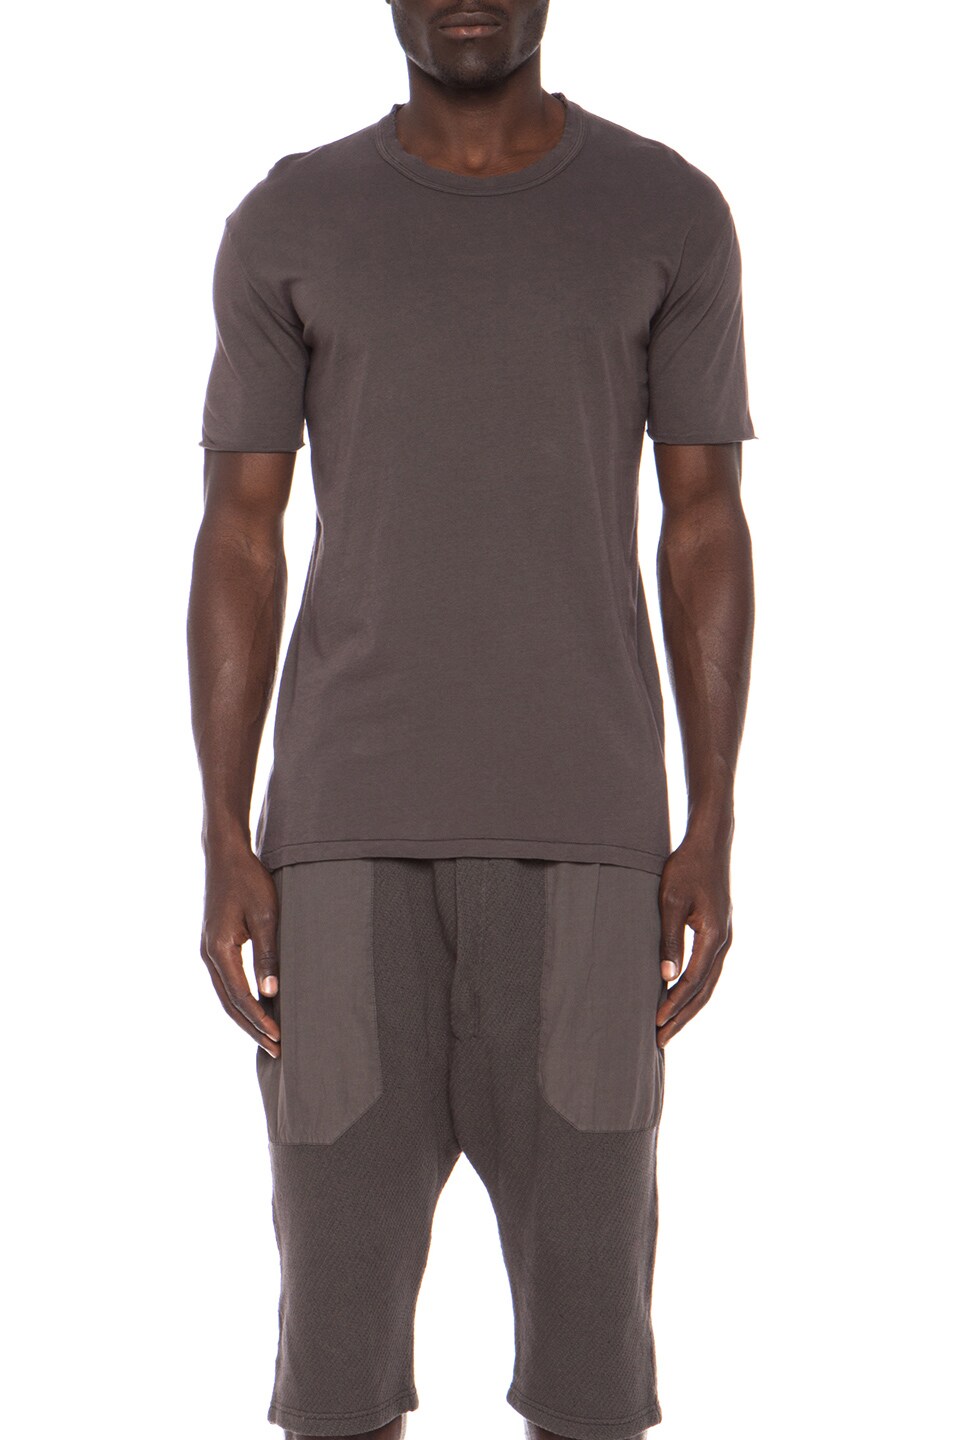 Image 1 of SILENT DAMIR DOMA Tari Cotton Tee in Ashes